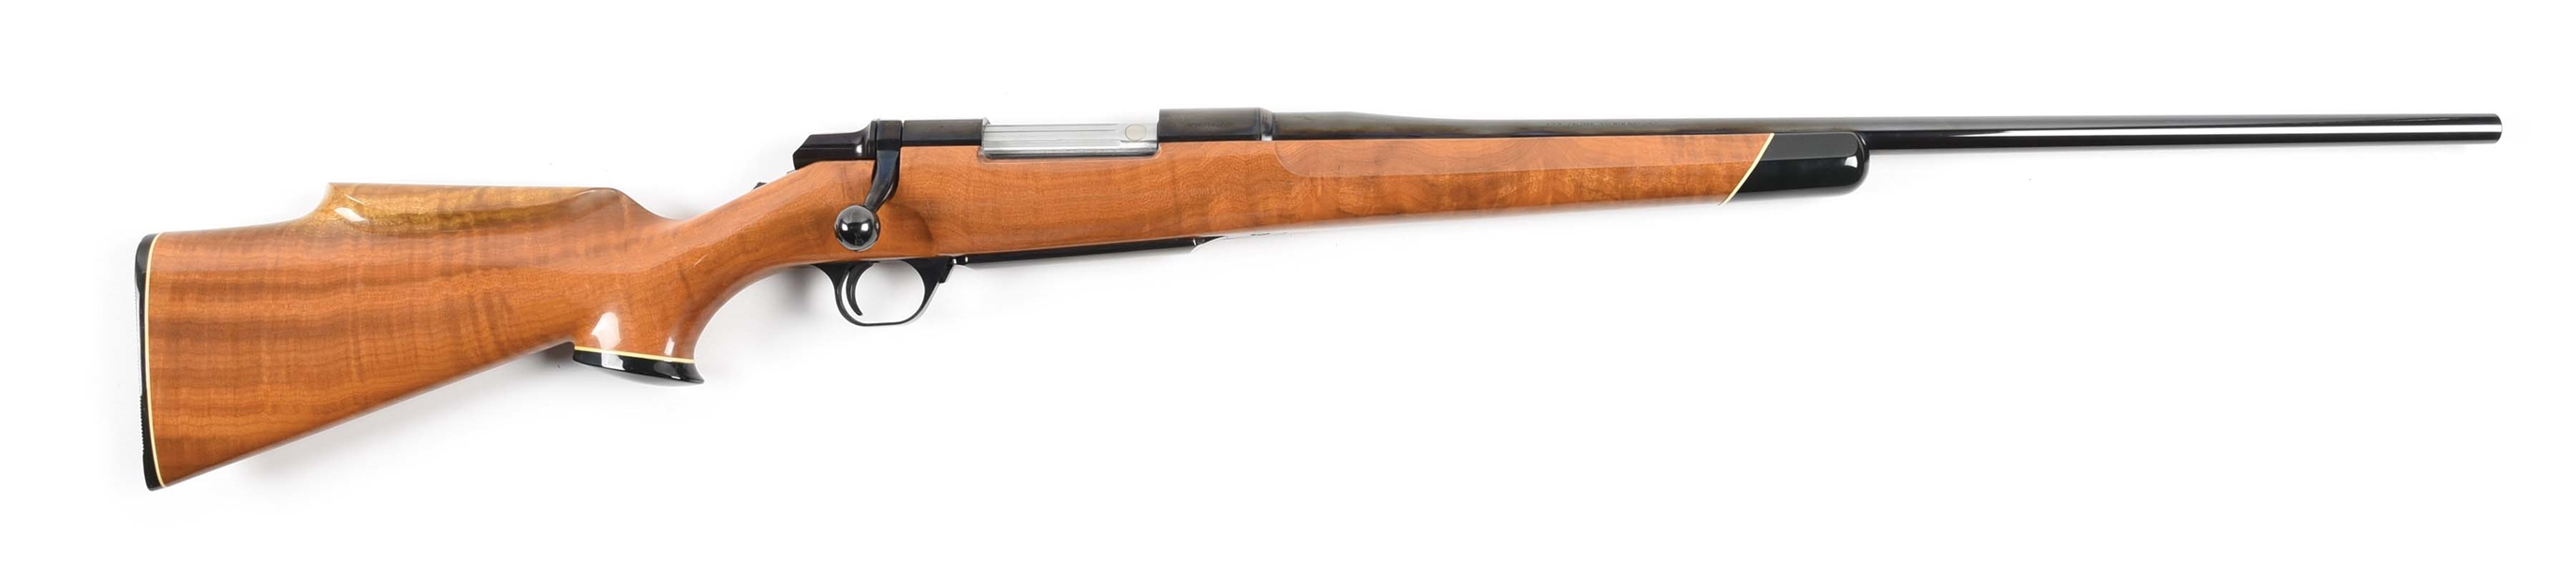 (M) BROWNING BBR BOLT ACTION RIFLE WITH MYRTLE STOCK.